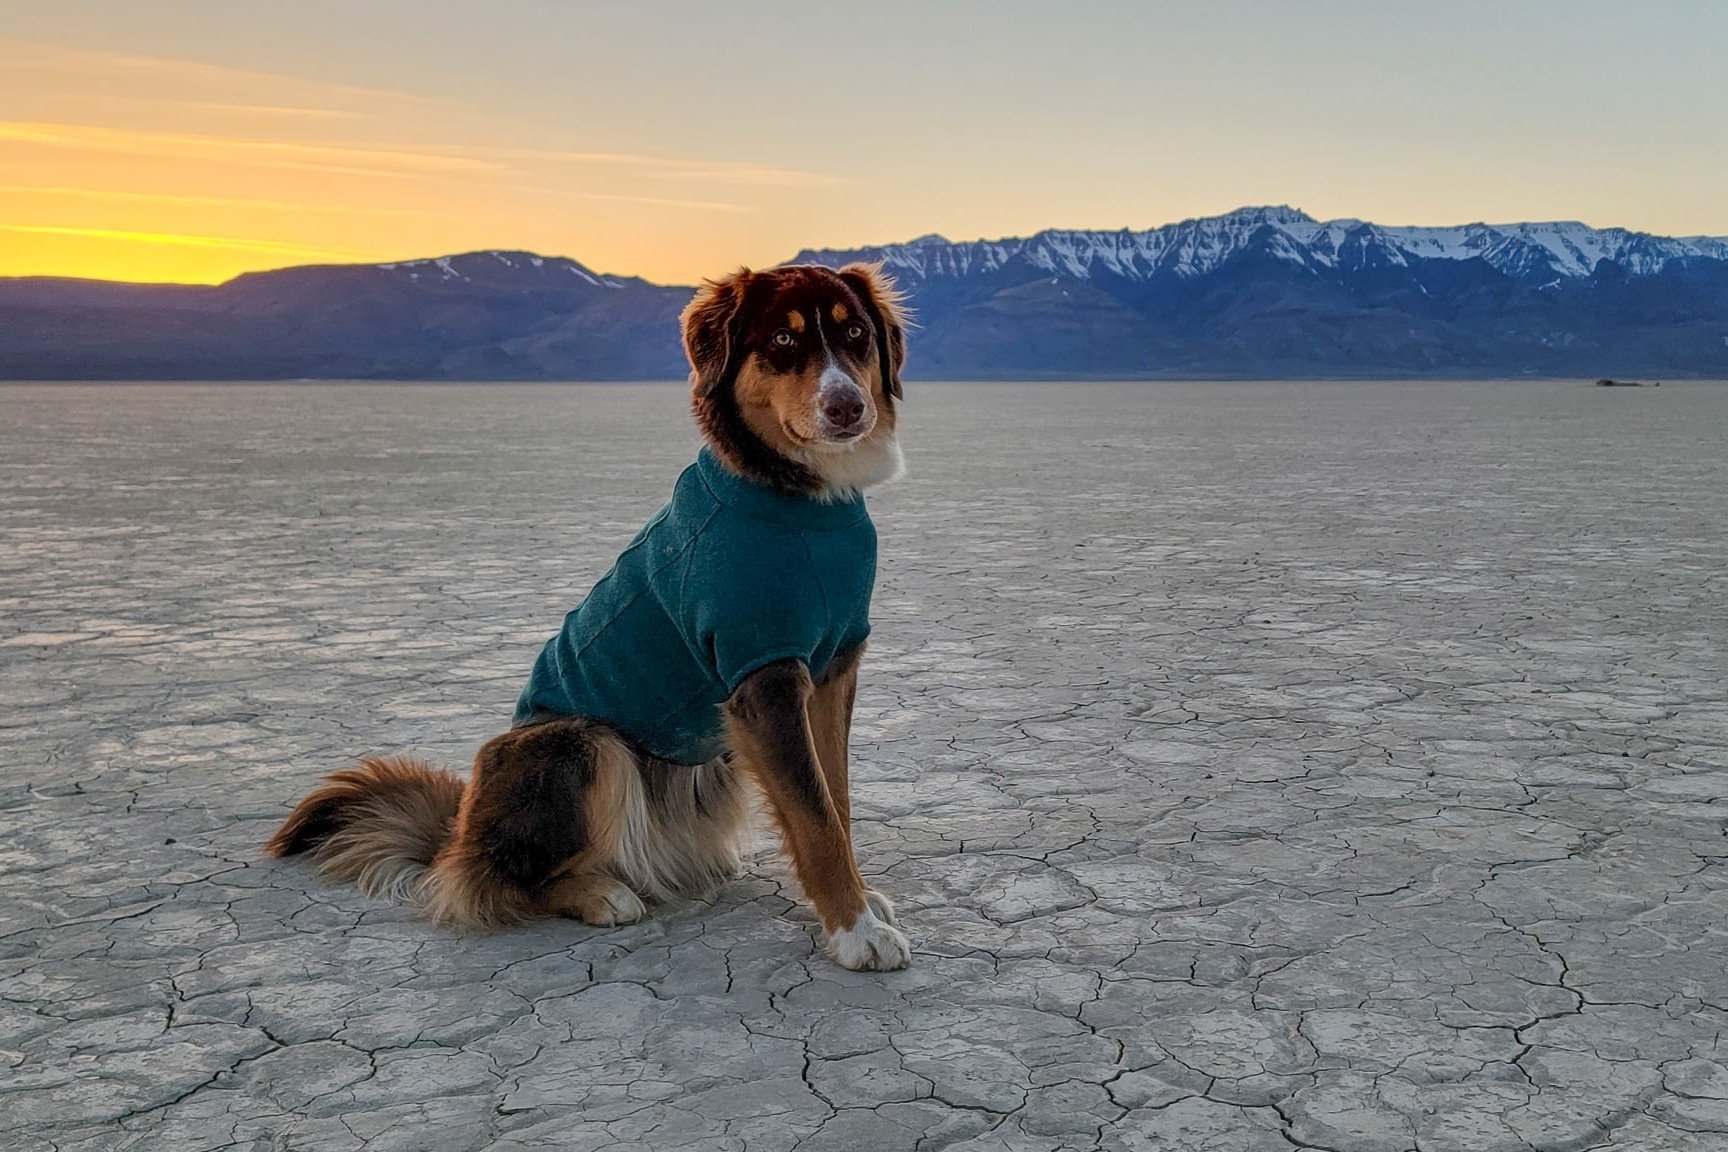 A dog wearing the Ruffwear Fernie jacket while camping in the Alvord Desert